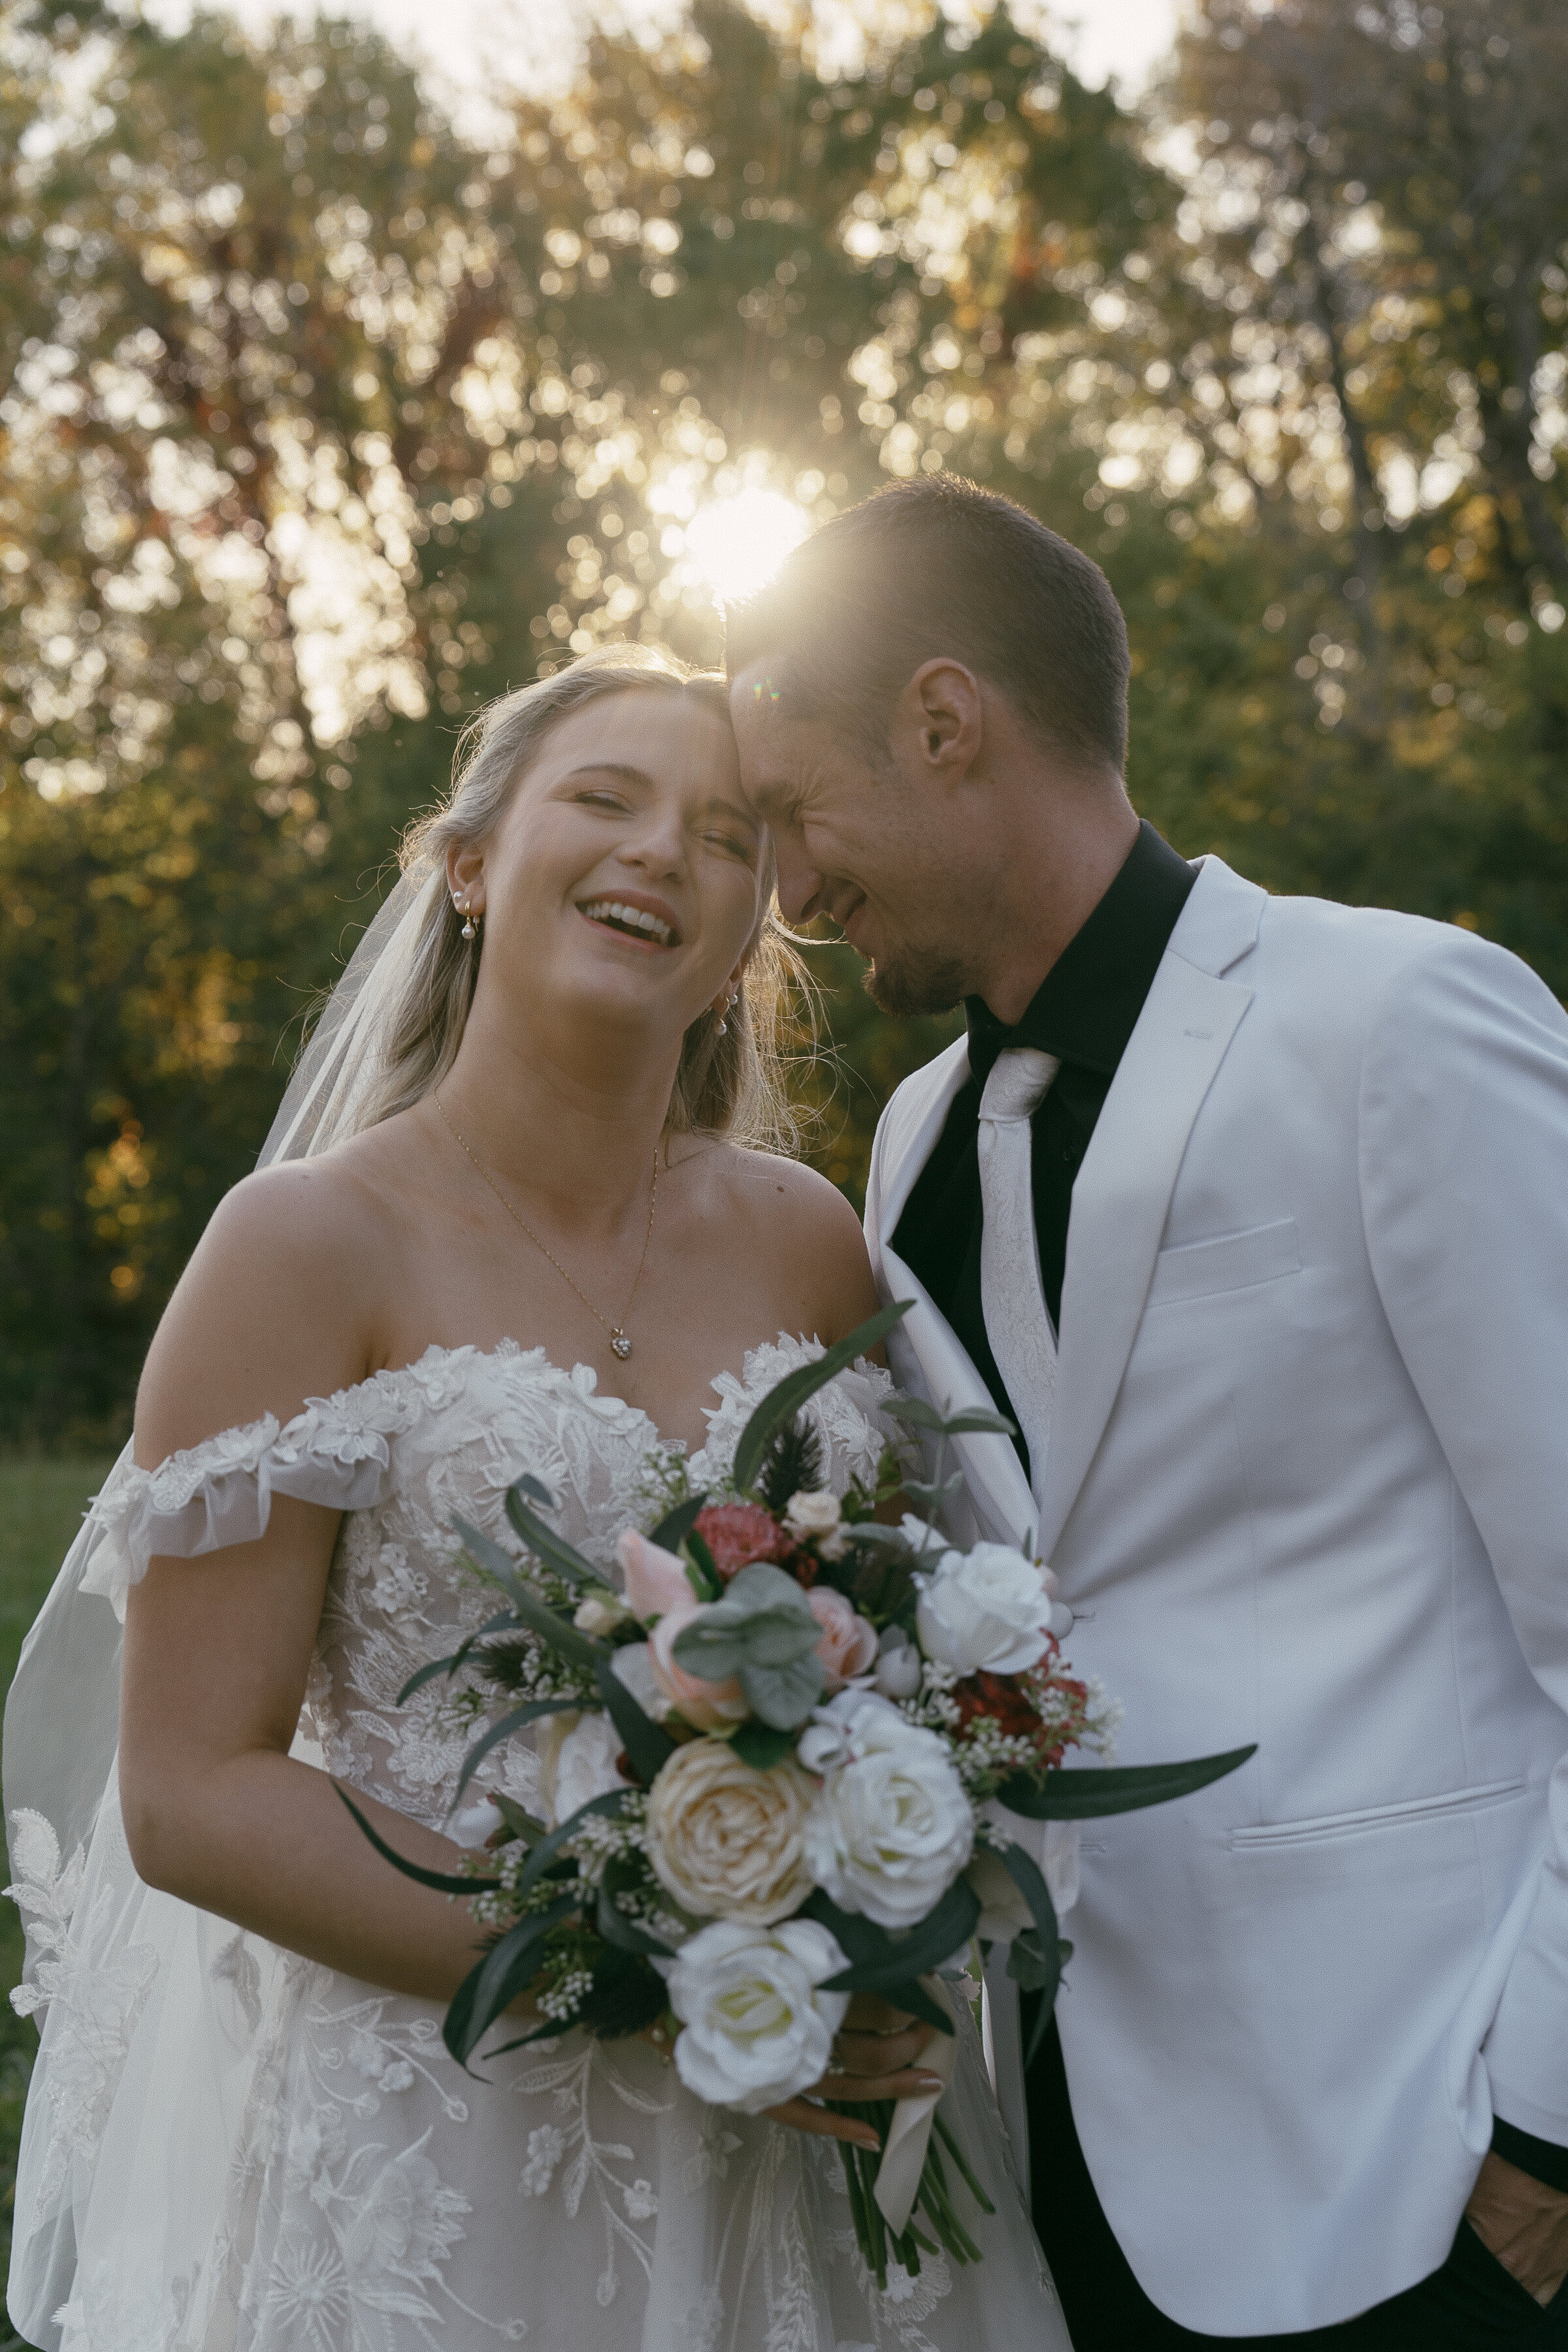 Joyful bride and groom with a bouquet in sunlight.